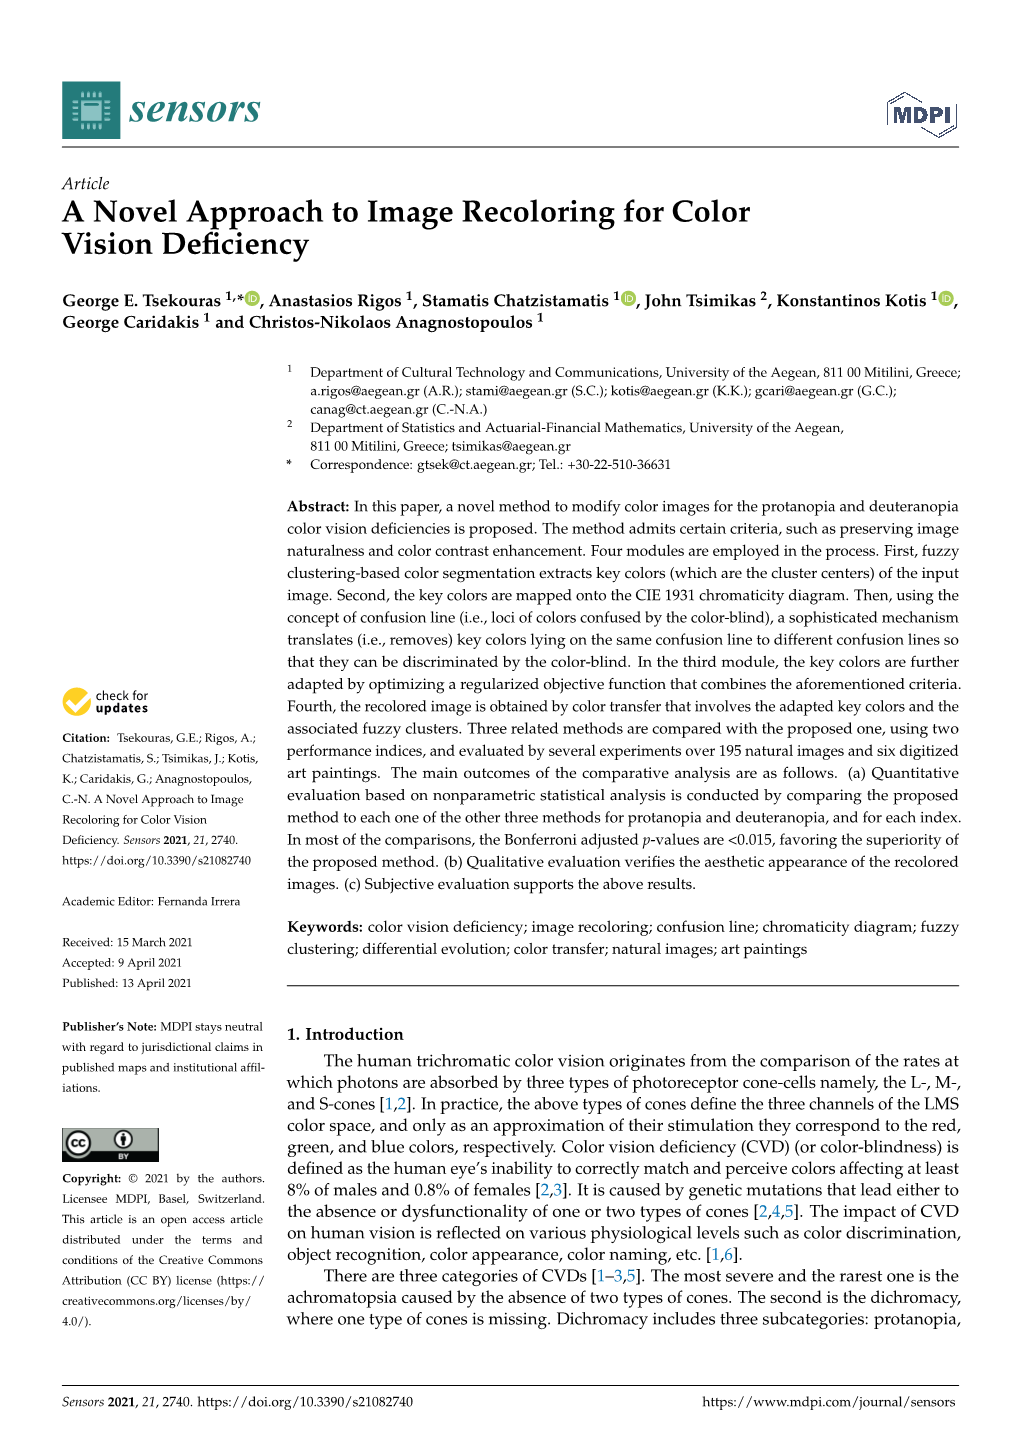 A Novel Approach to Image Recoloring for Color Vision Deficiency